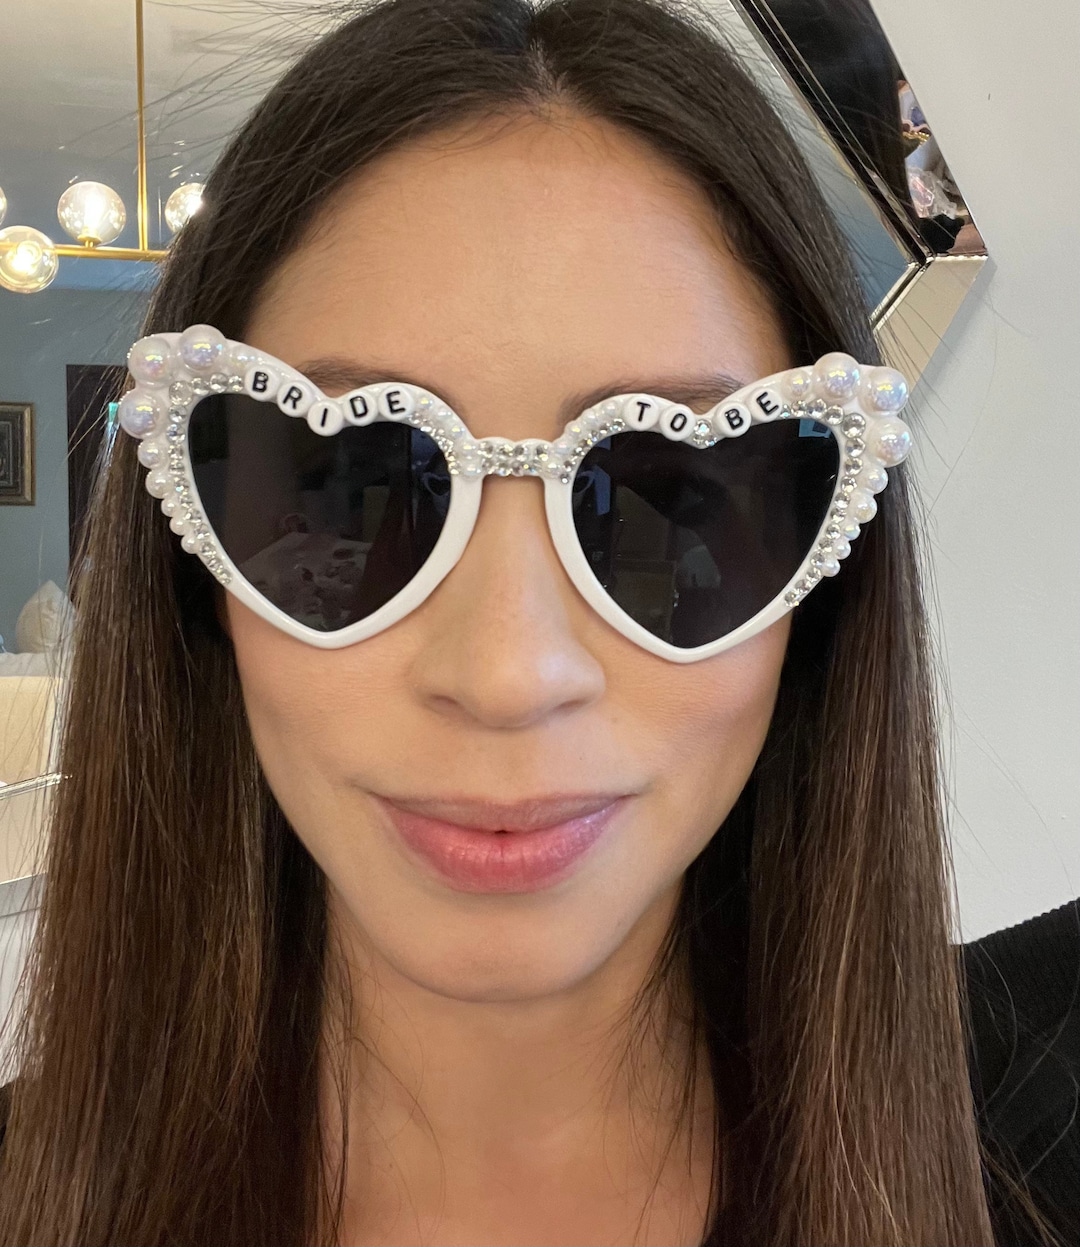 Bride to Be Pearl Embellished Heart Sunglasses - Etsy